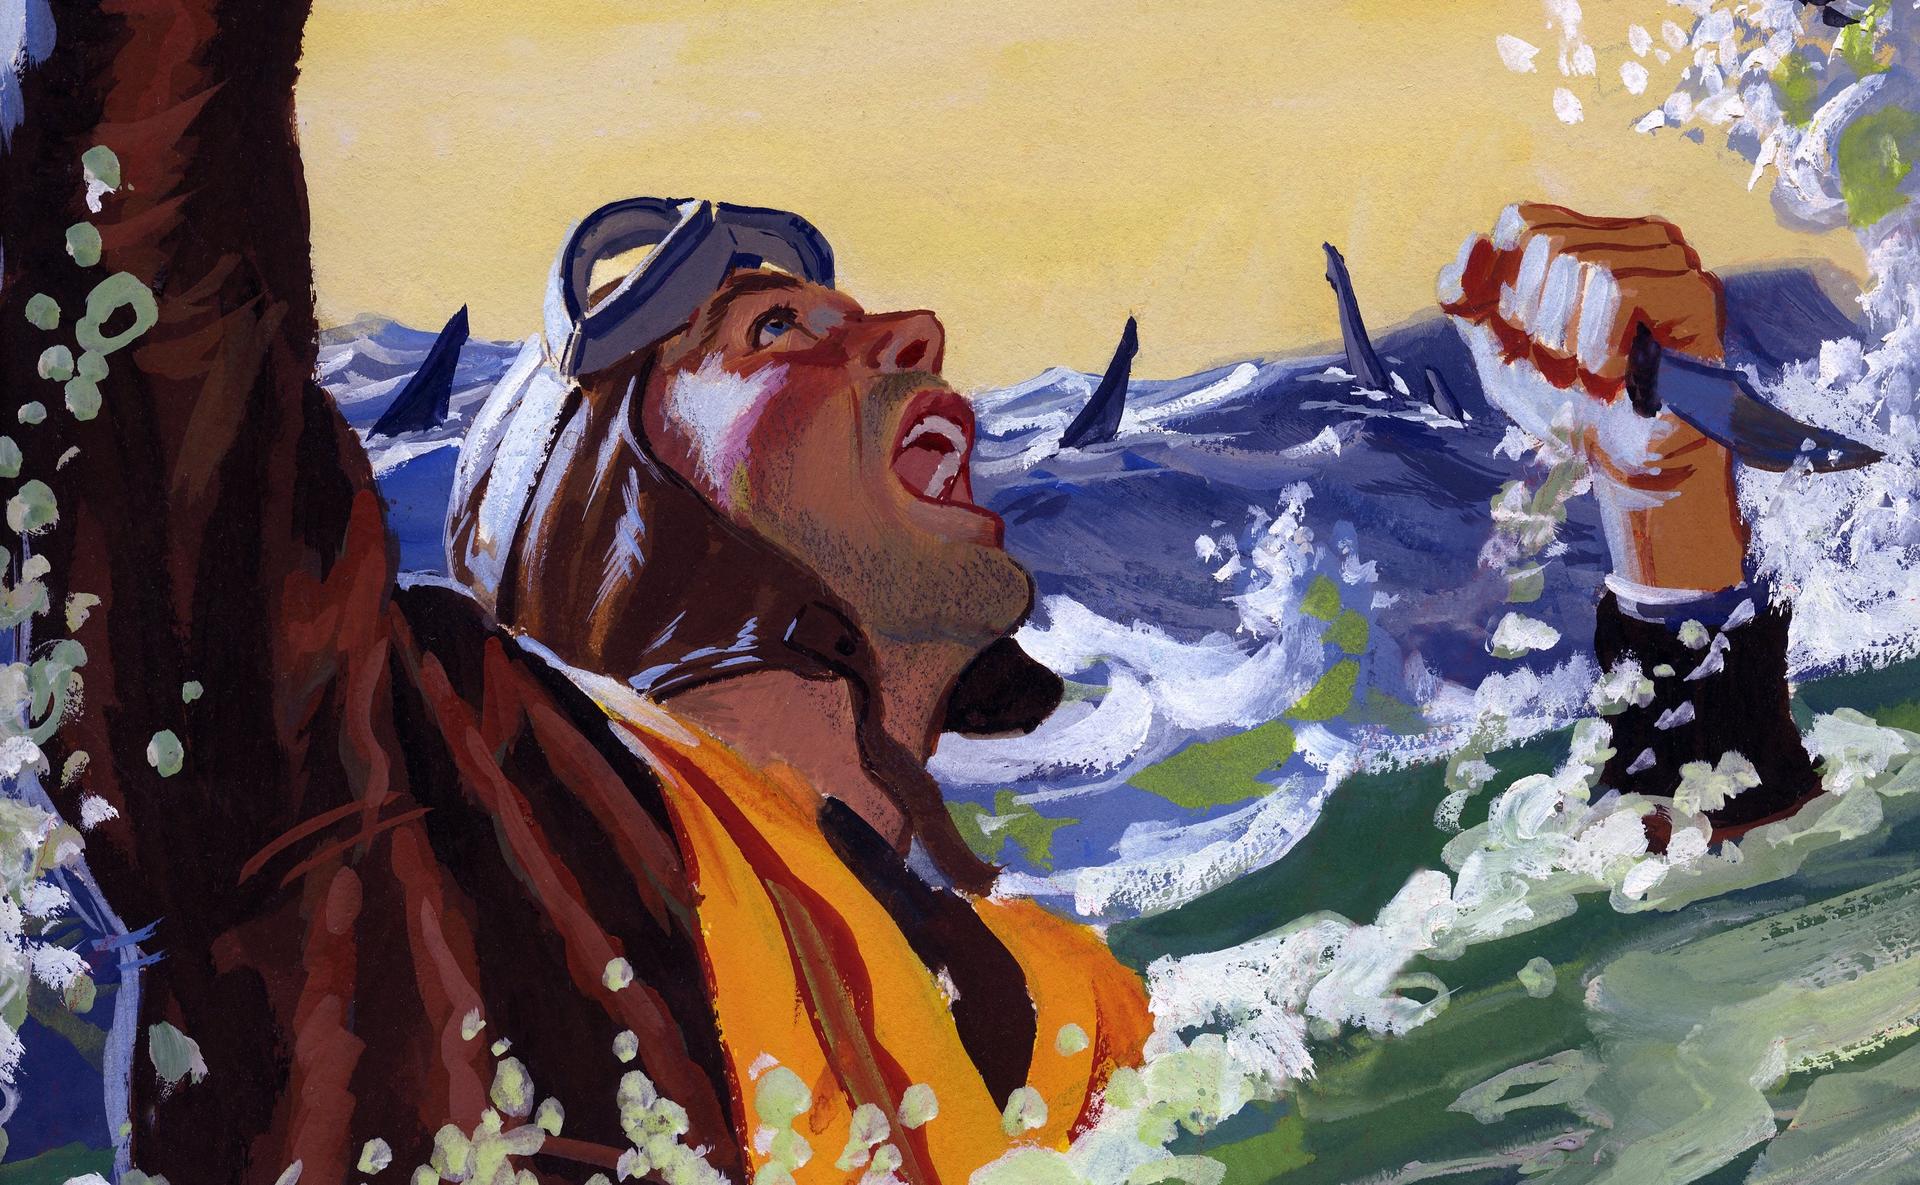 A painting for the U.S. Army’s Stars and Stripes newspaper shows a downed pilot fending off sharks with a knife.